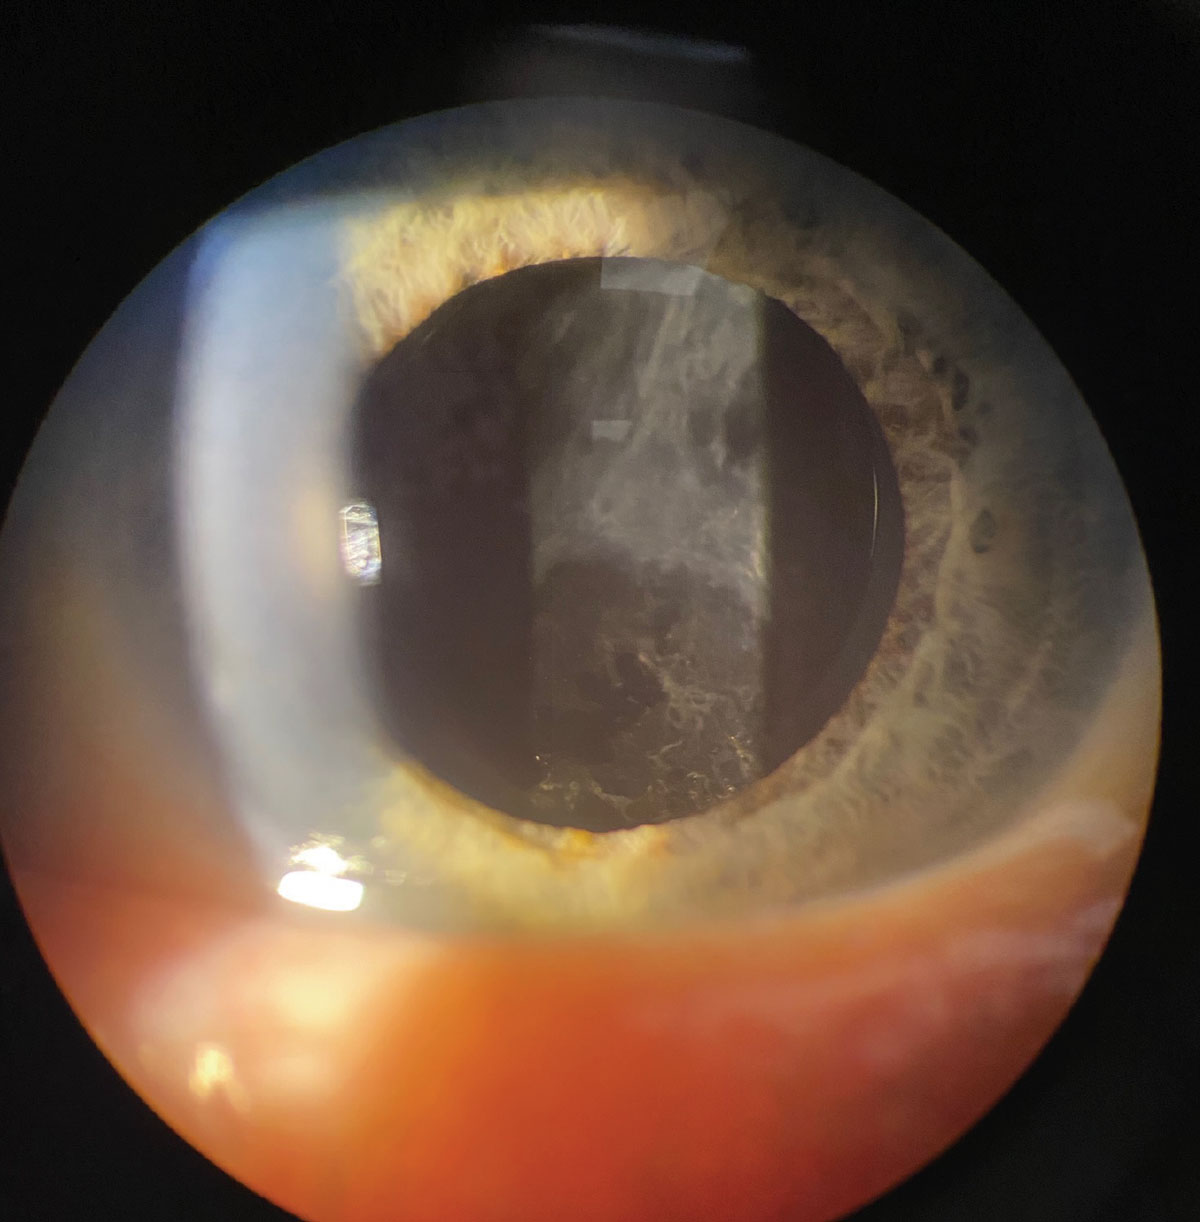 Posterior capsular opacification can be seen in this image. In premium lenses, especially those correcting more than one vision zone such as an EDOF or trifocal lens, mild posterior capsular opacification can cause severe halo/glare effects.